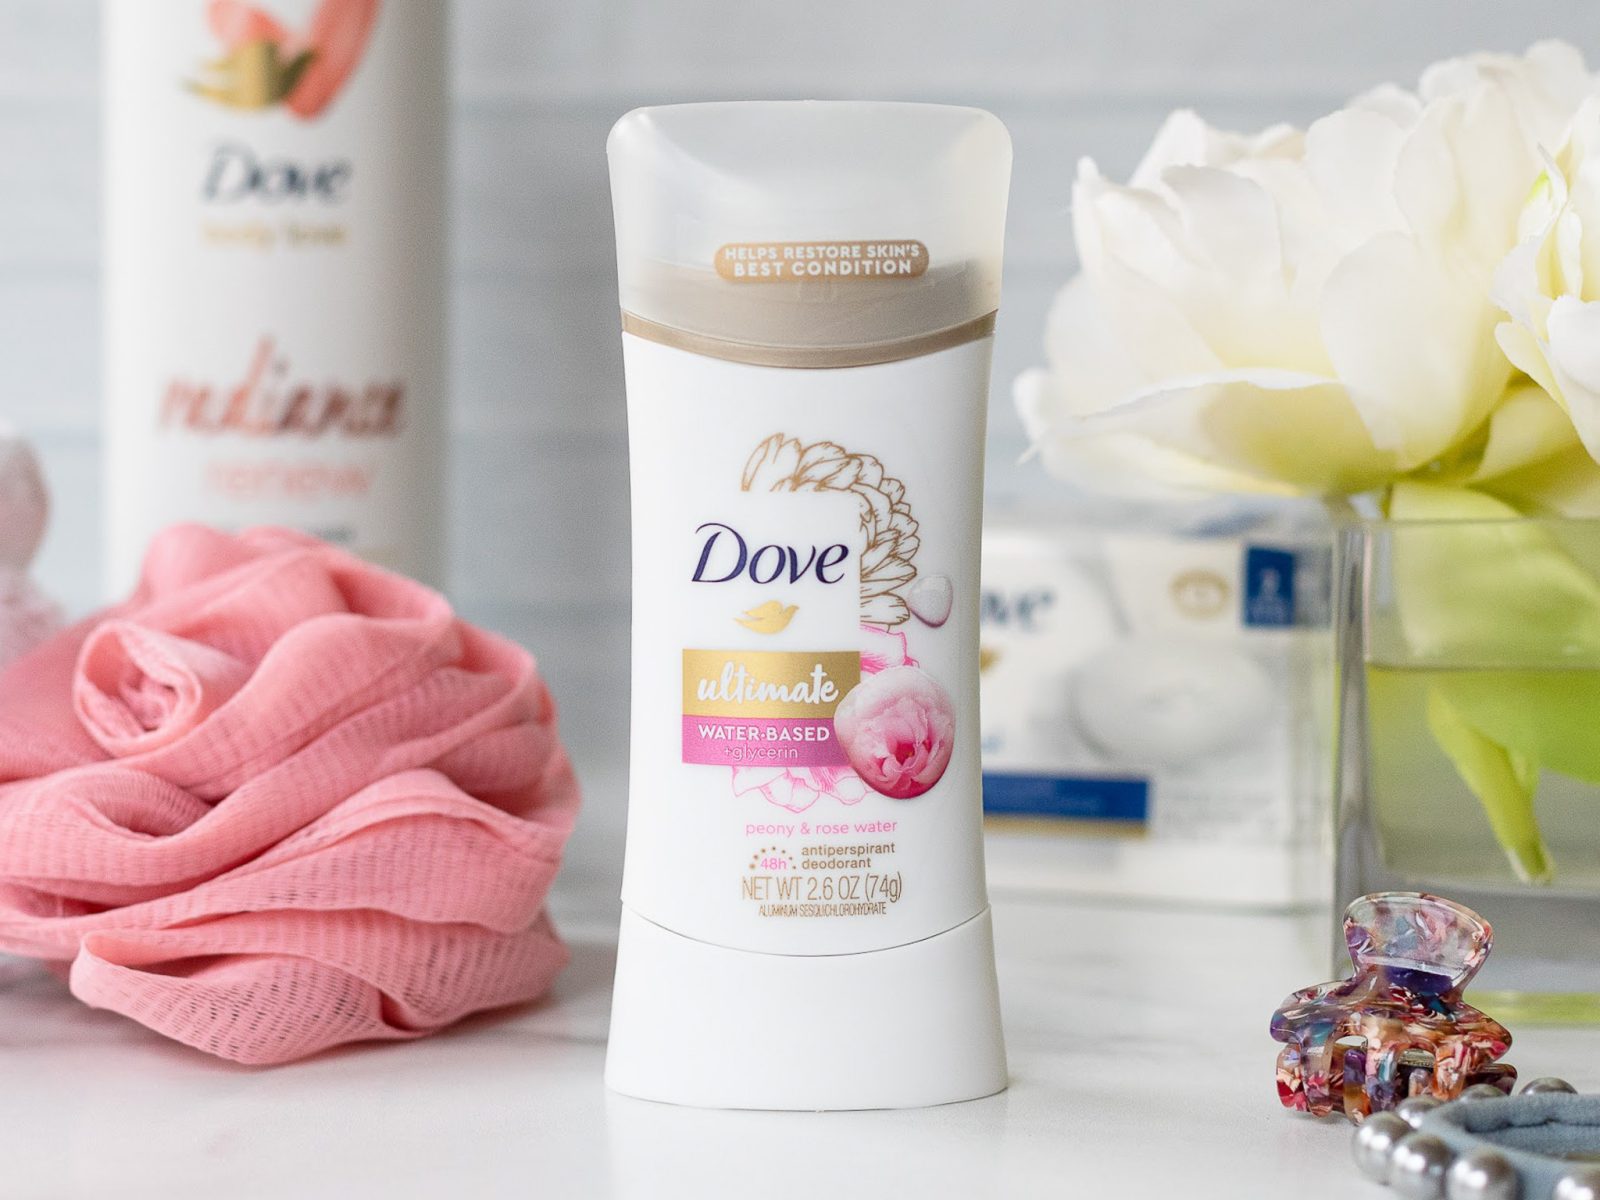 Super Deal On Dove Ultimate Antiperspirant Deodorant At Publix – Restore That Delicate Underarm Skin To Its Best Condition